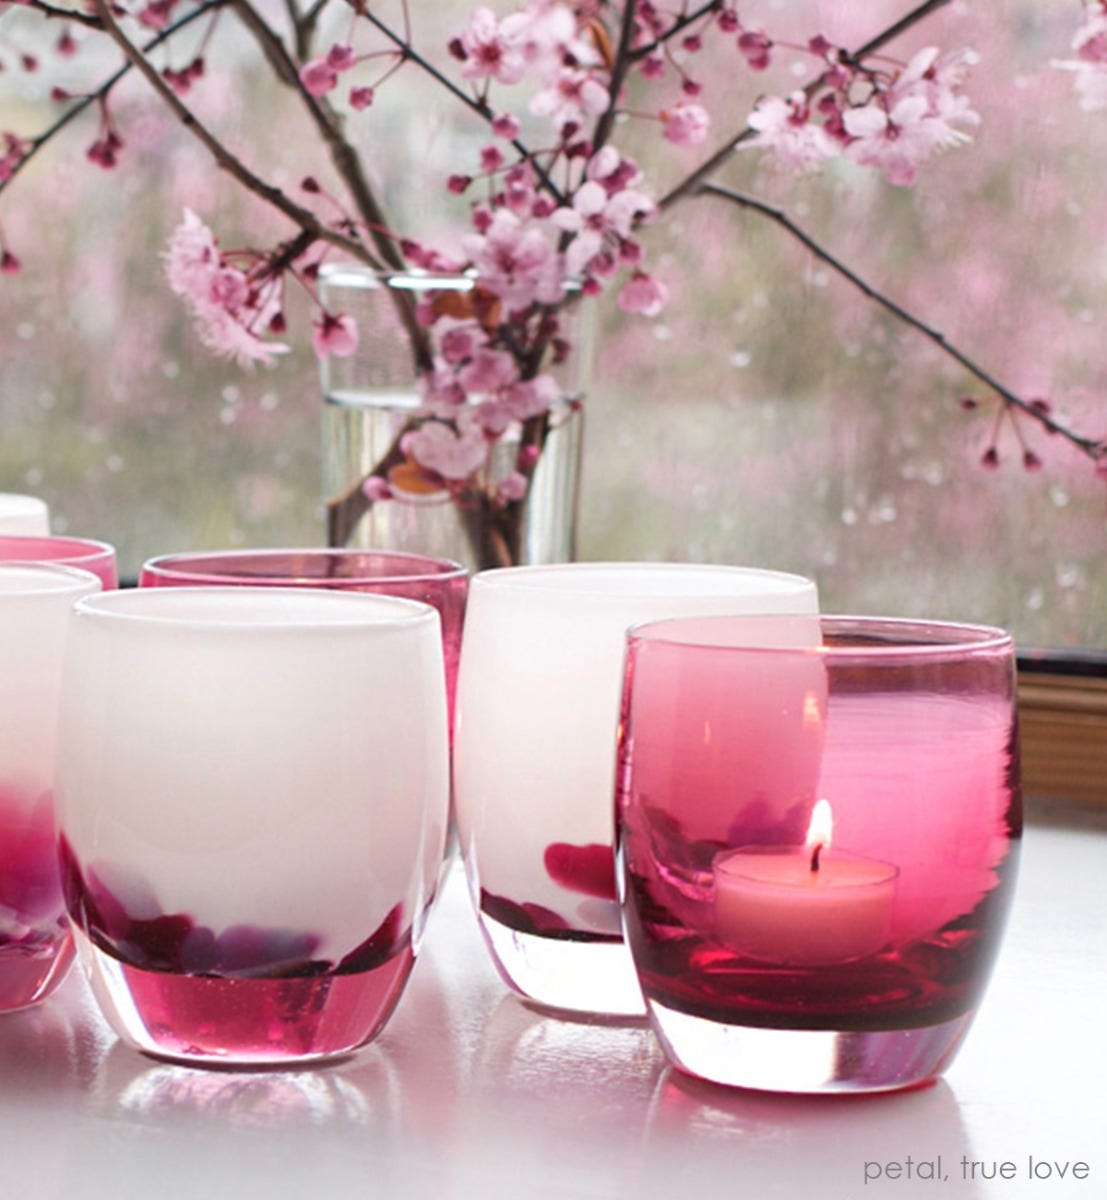 true love, transparent deep raspberry pink, hand-blown glass votive candle holder. Paired with petal.